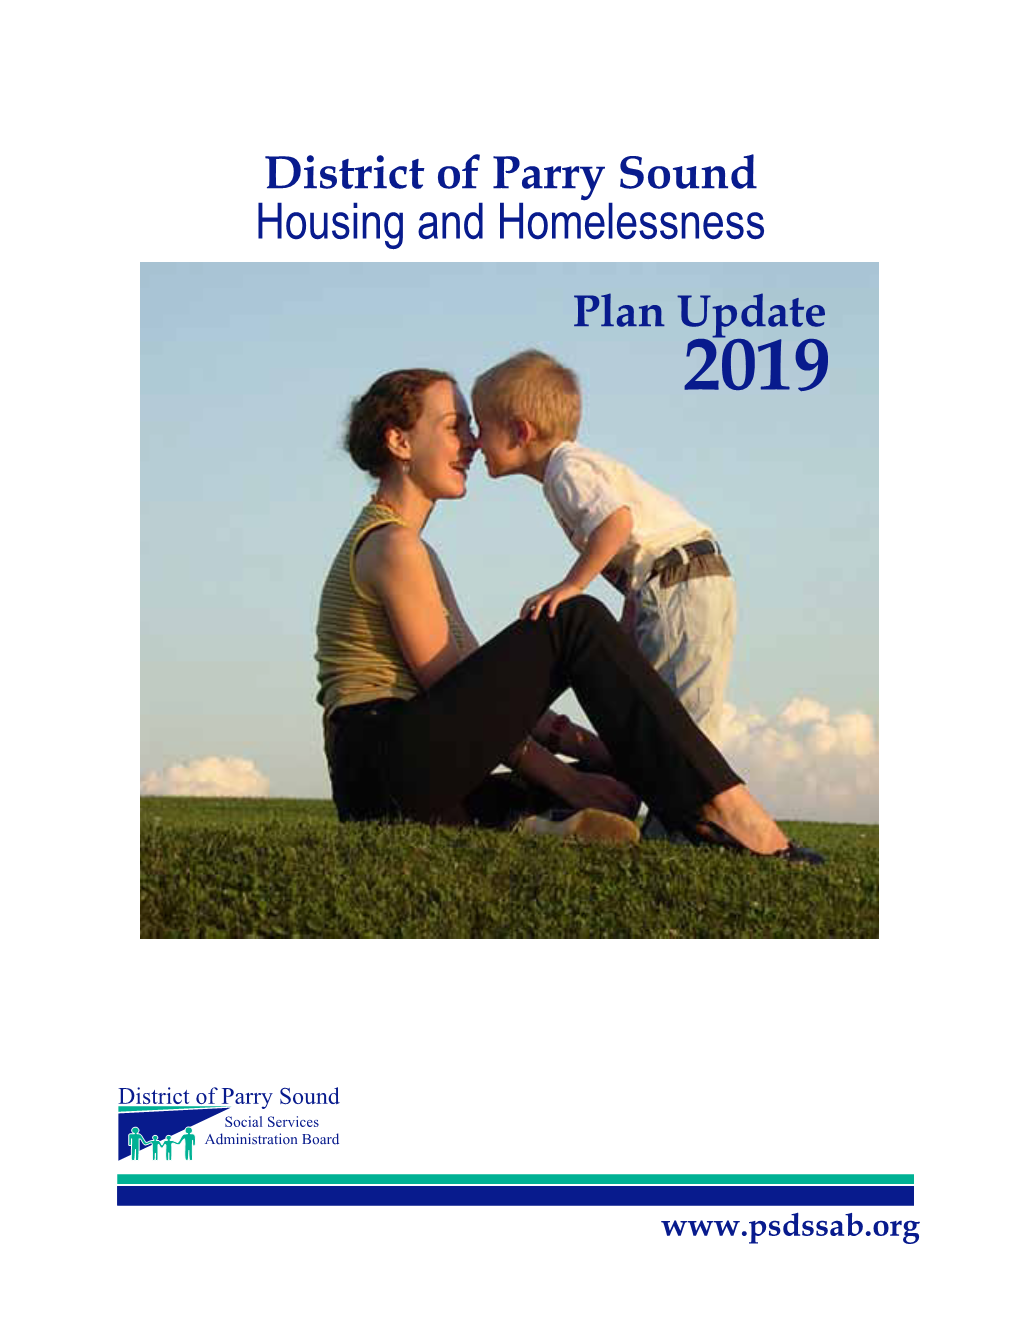 Housing and Homelessness Plan Update 2019